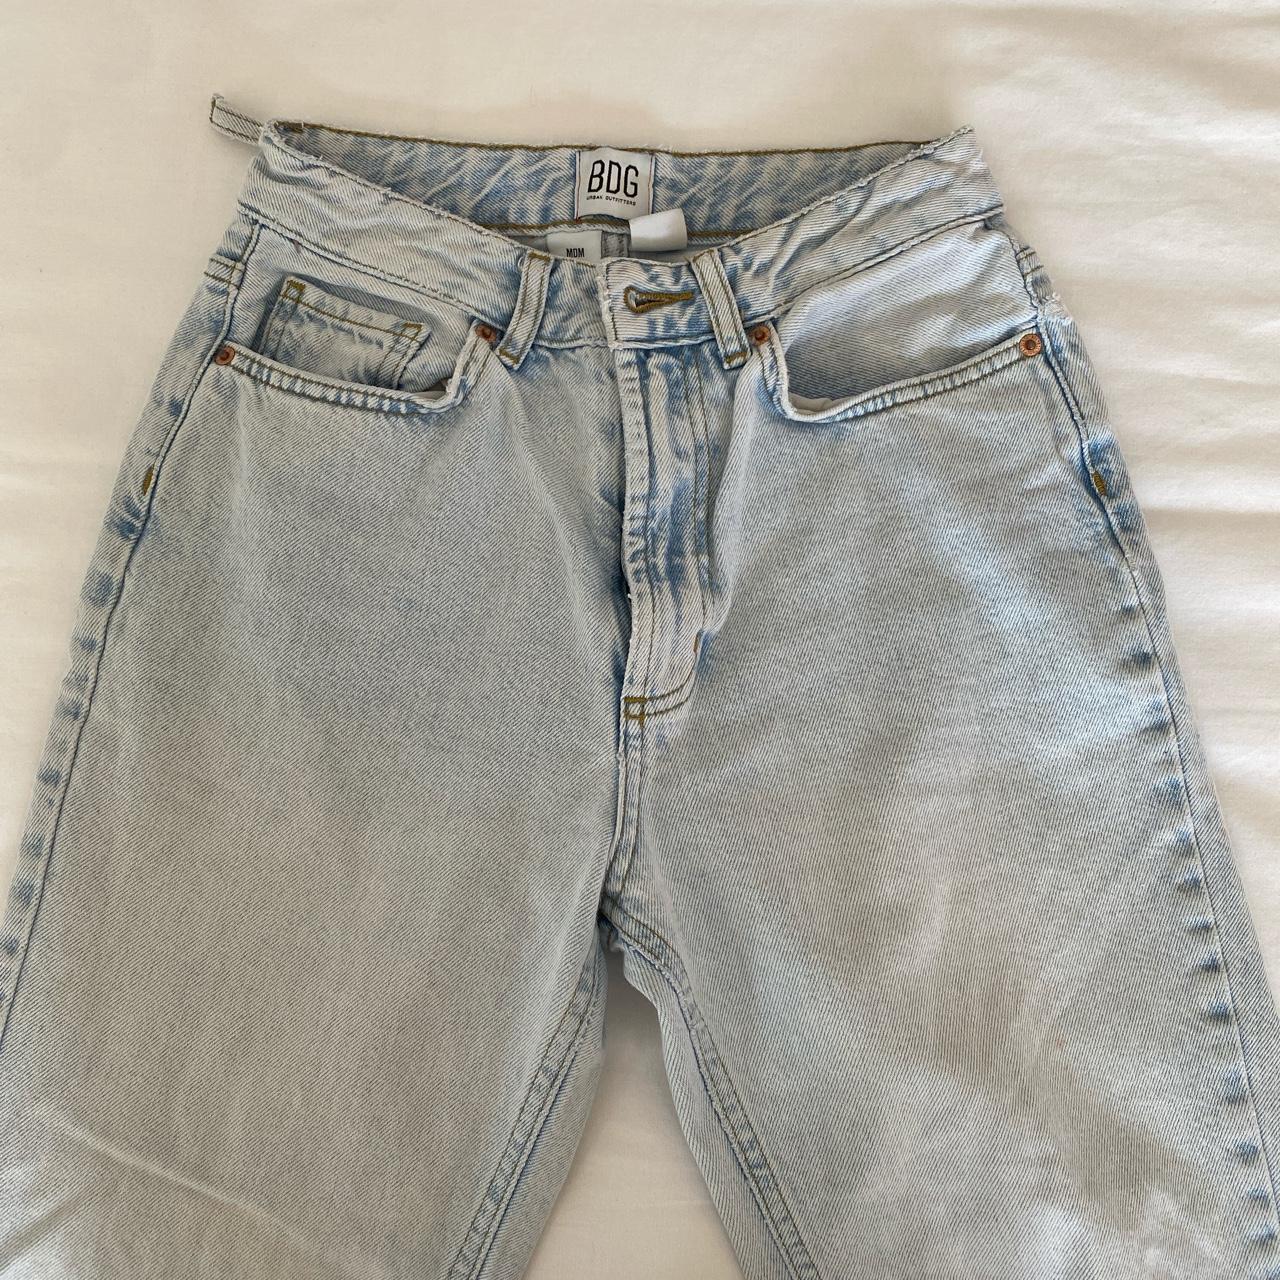 Urban Outfitters mom jeans size 25, in the perfect... - Depop